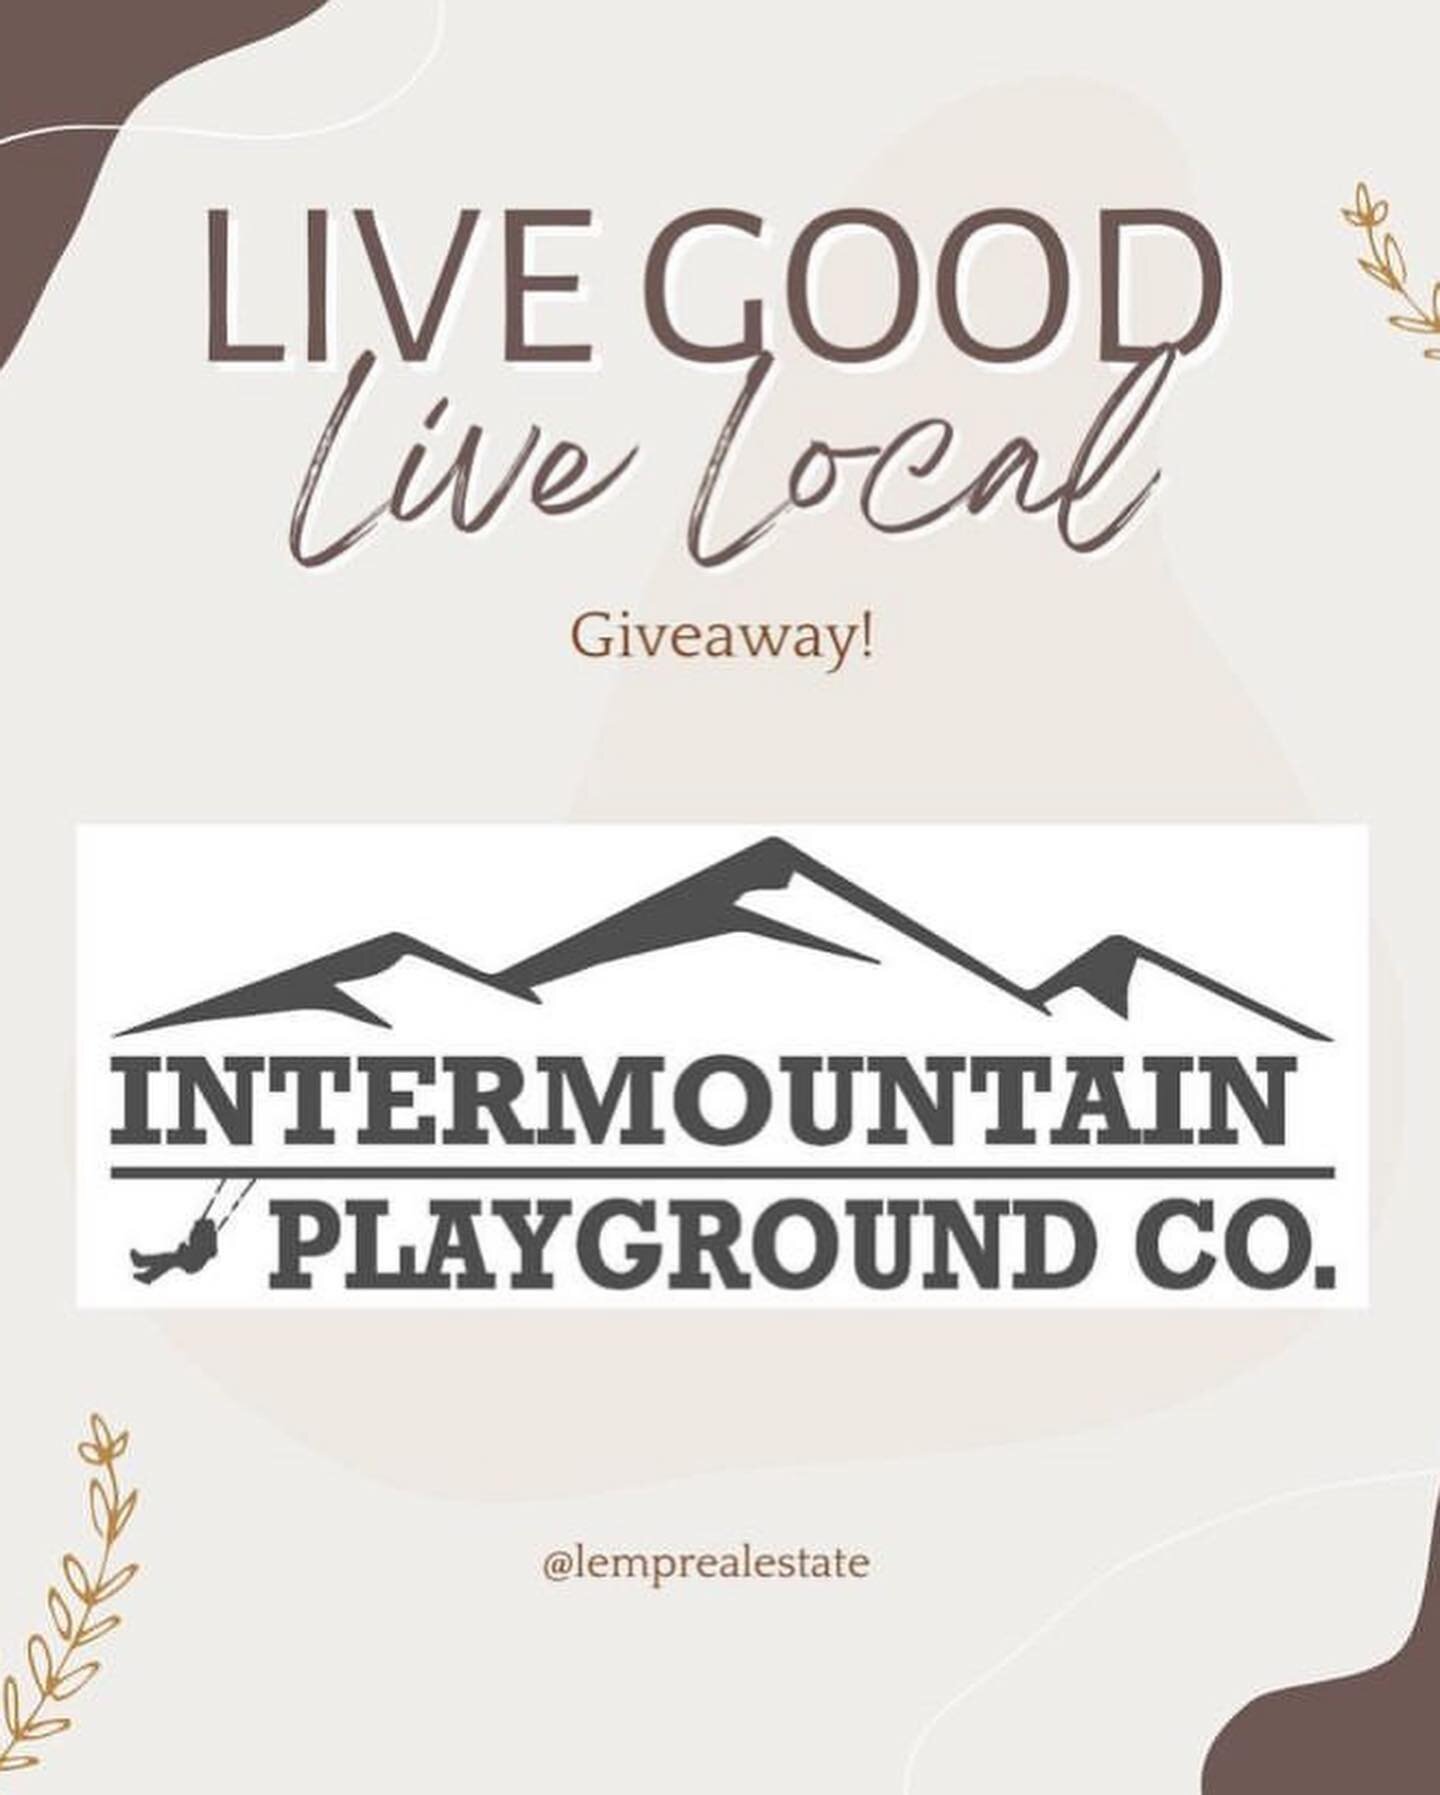 Thank you @lemprealestate for the opportunity to be featured in your outstanding Live Good, Live Local monthly giveaway!
⠀
Swipe to see rules on how to enter for a chance to win a $500 gift card, good toward ANY purchase (stain, playground, installat